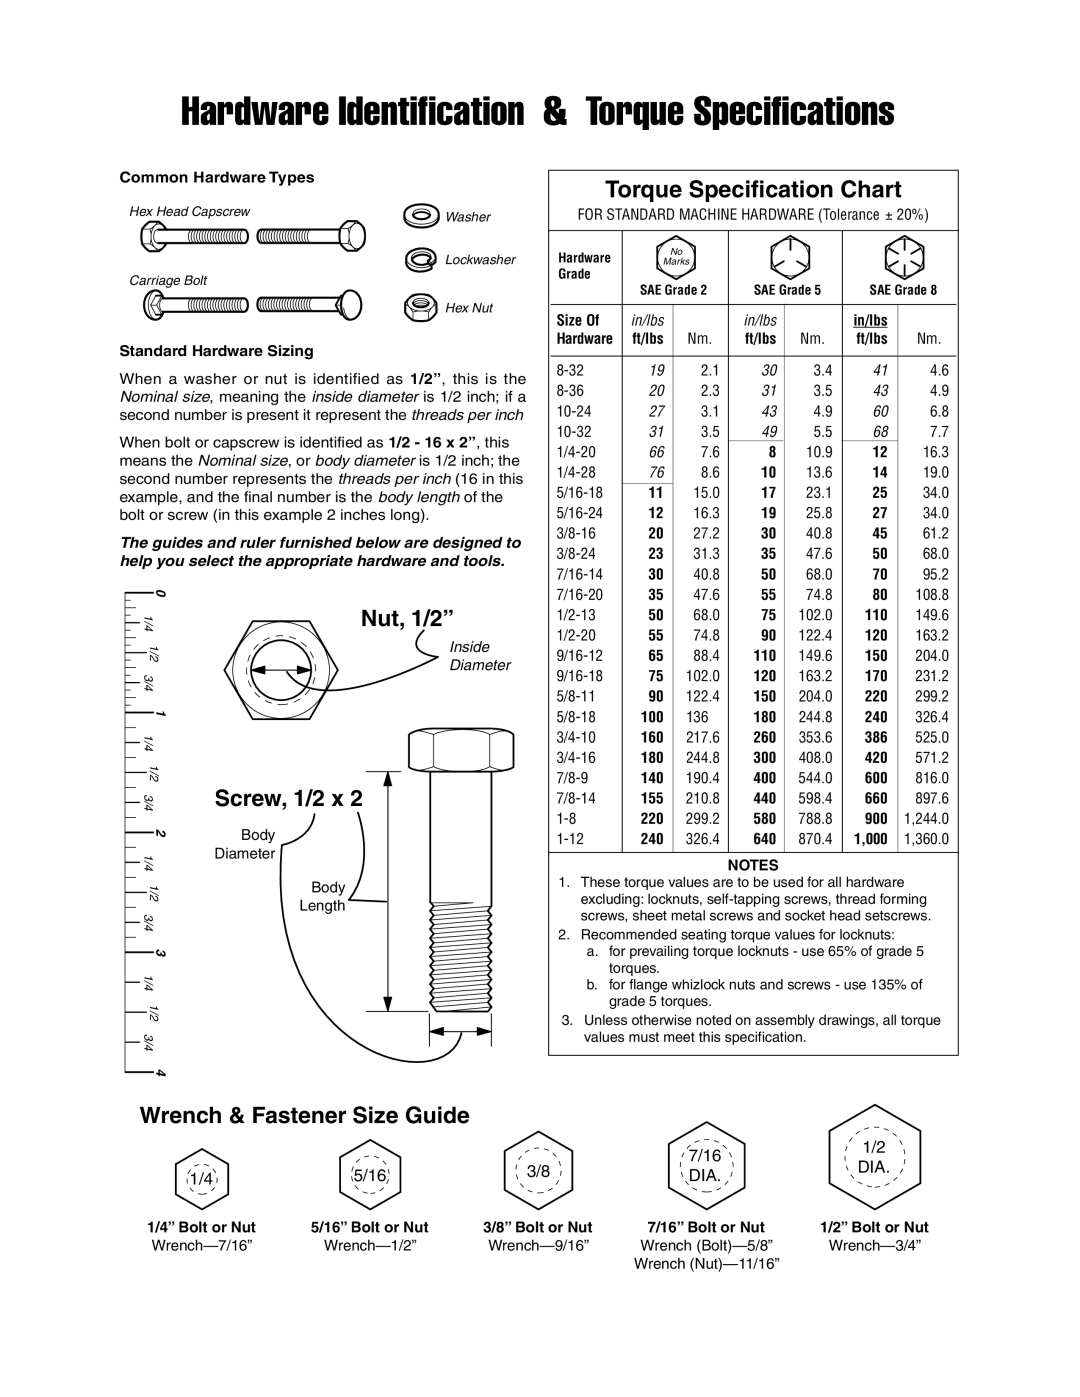 Snapper 4053 Wrench & Fastener Size Guide, Common Hardware Types, Standard Hardware Sizing, 1/4” Bolt or Nut, Nut, 1/2” 